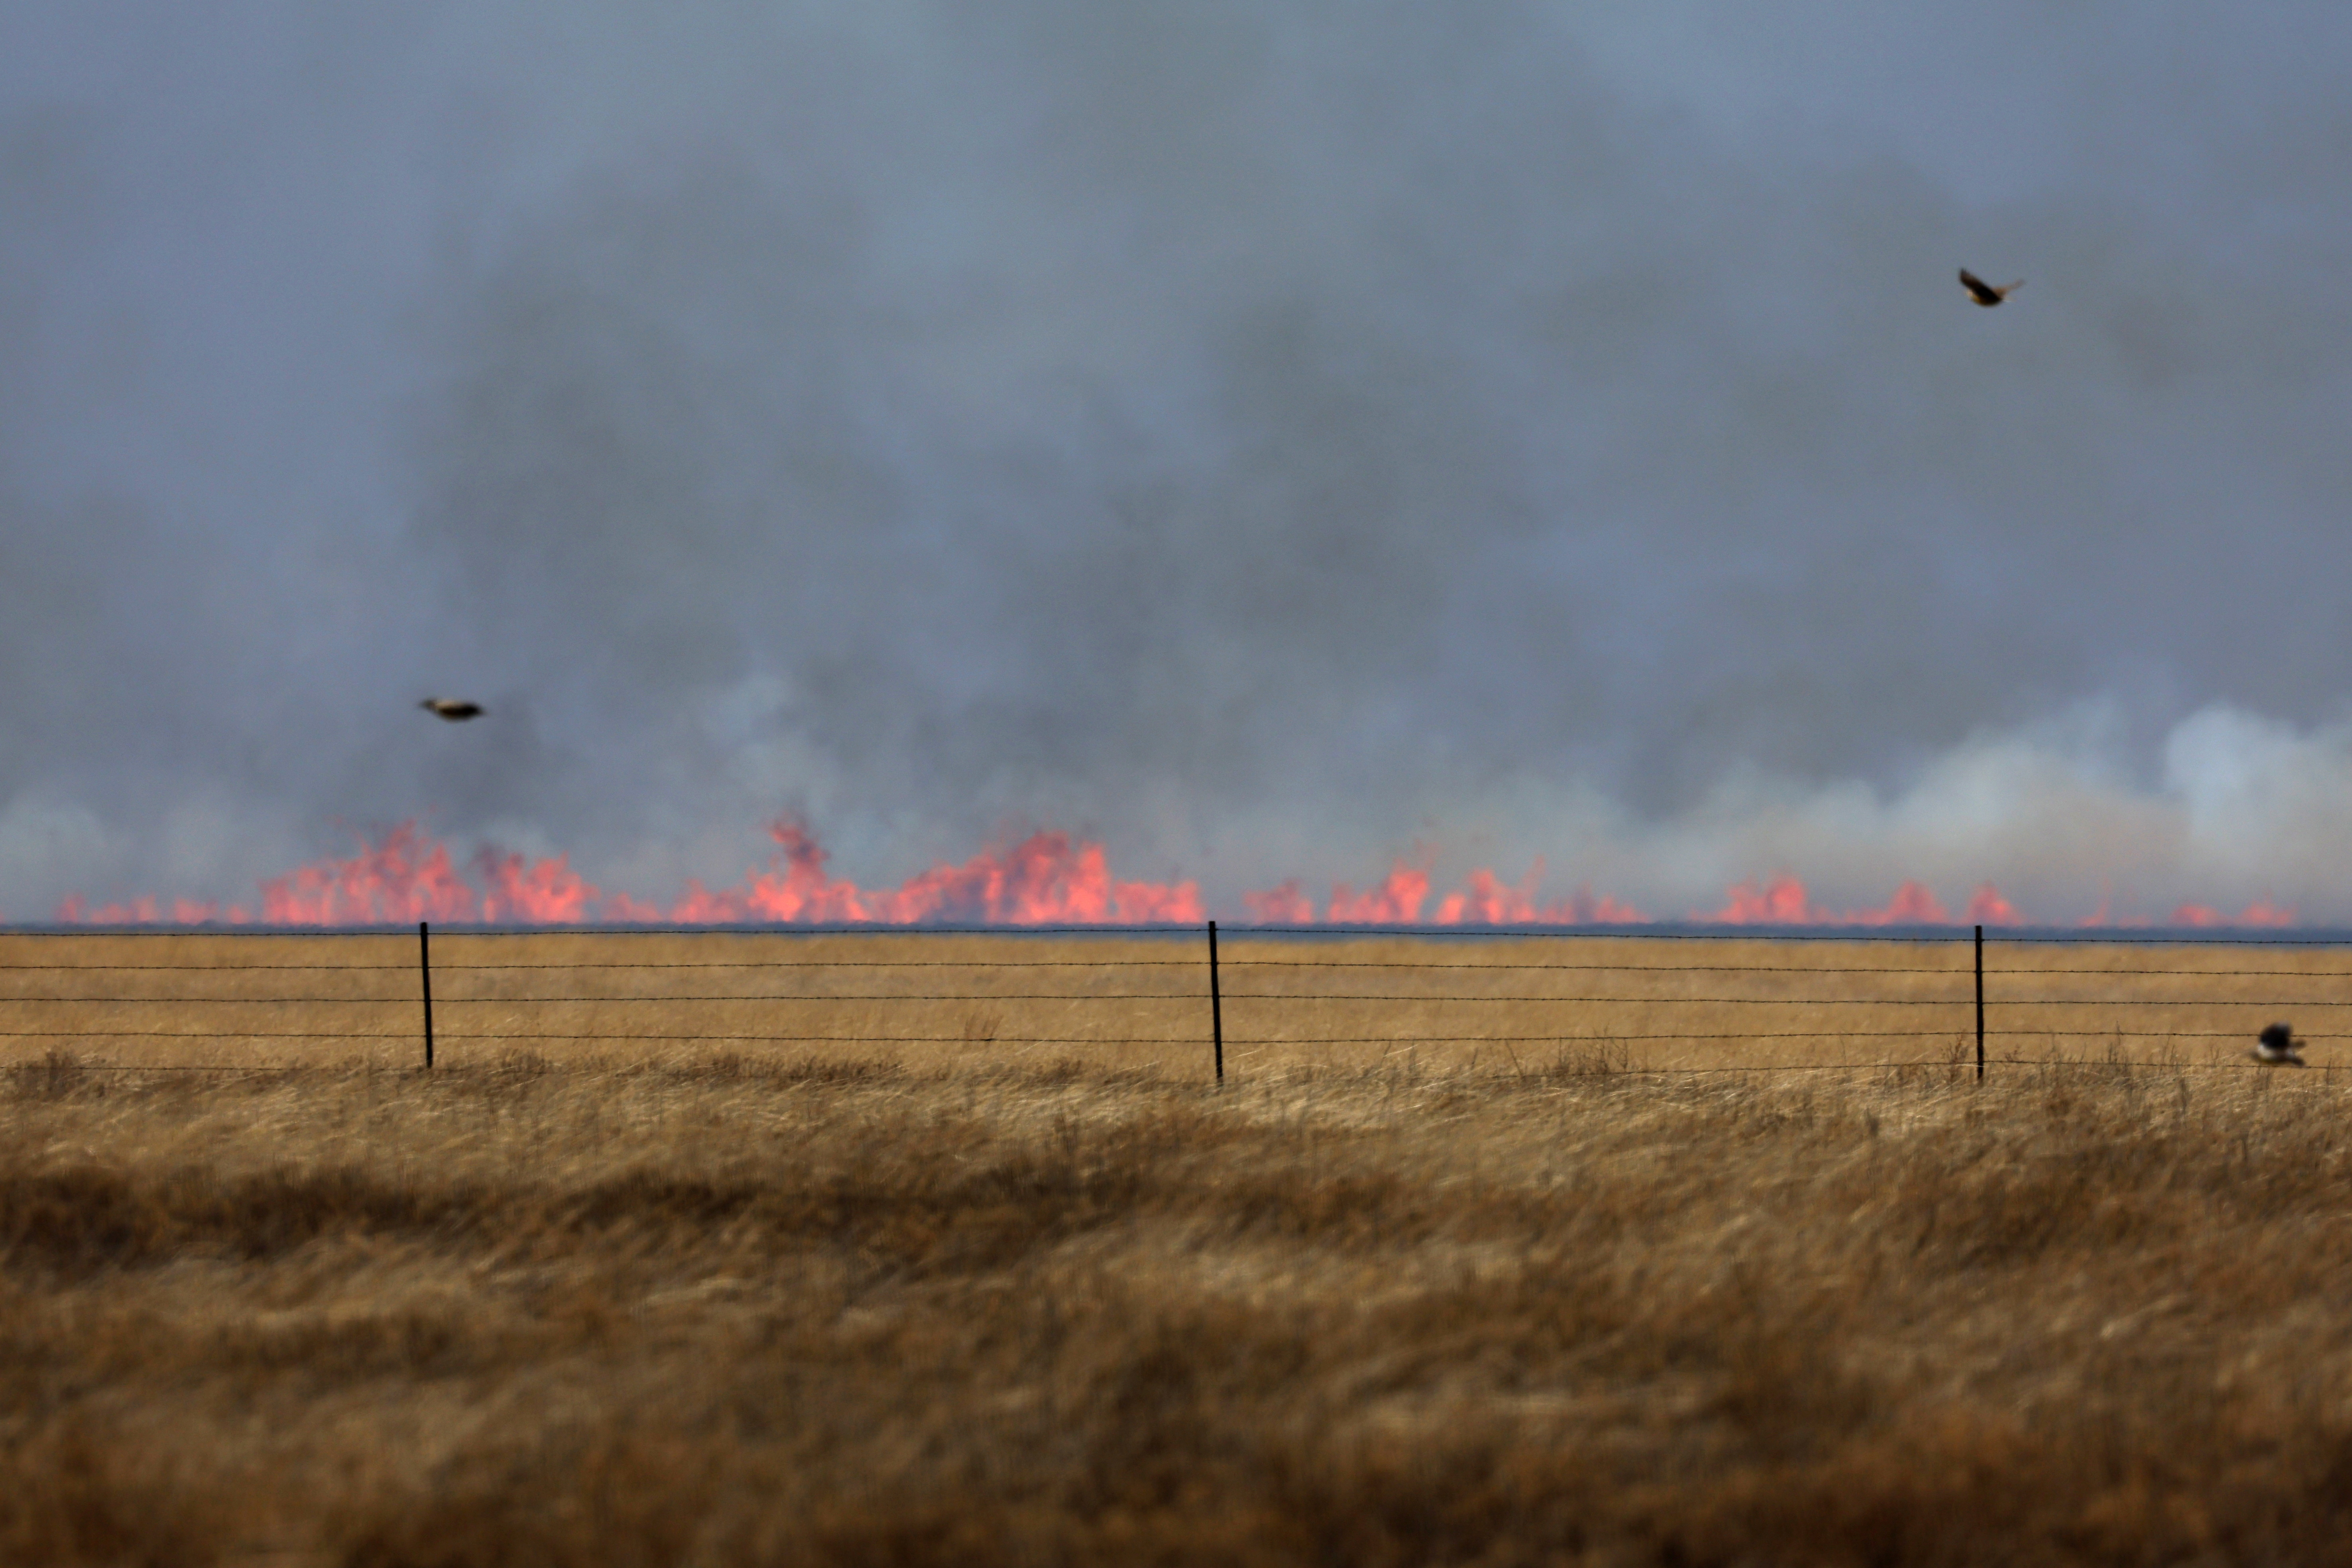 Wildfires kick up in high winds in the Texas panhandle, U.S.